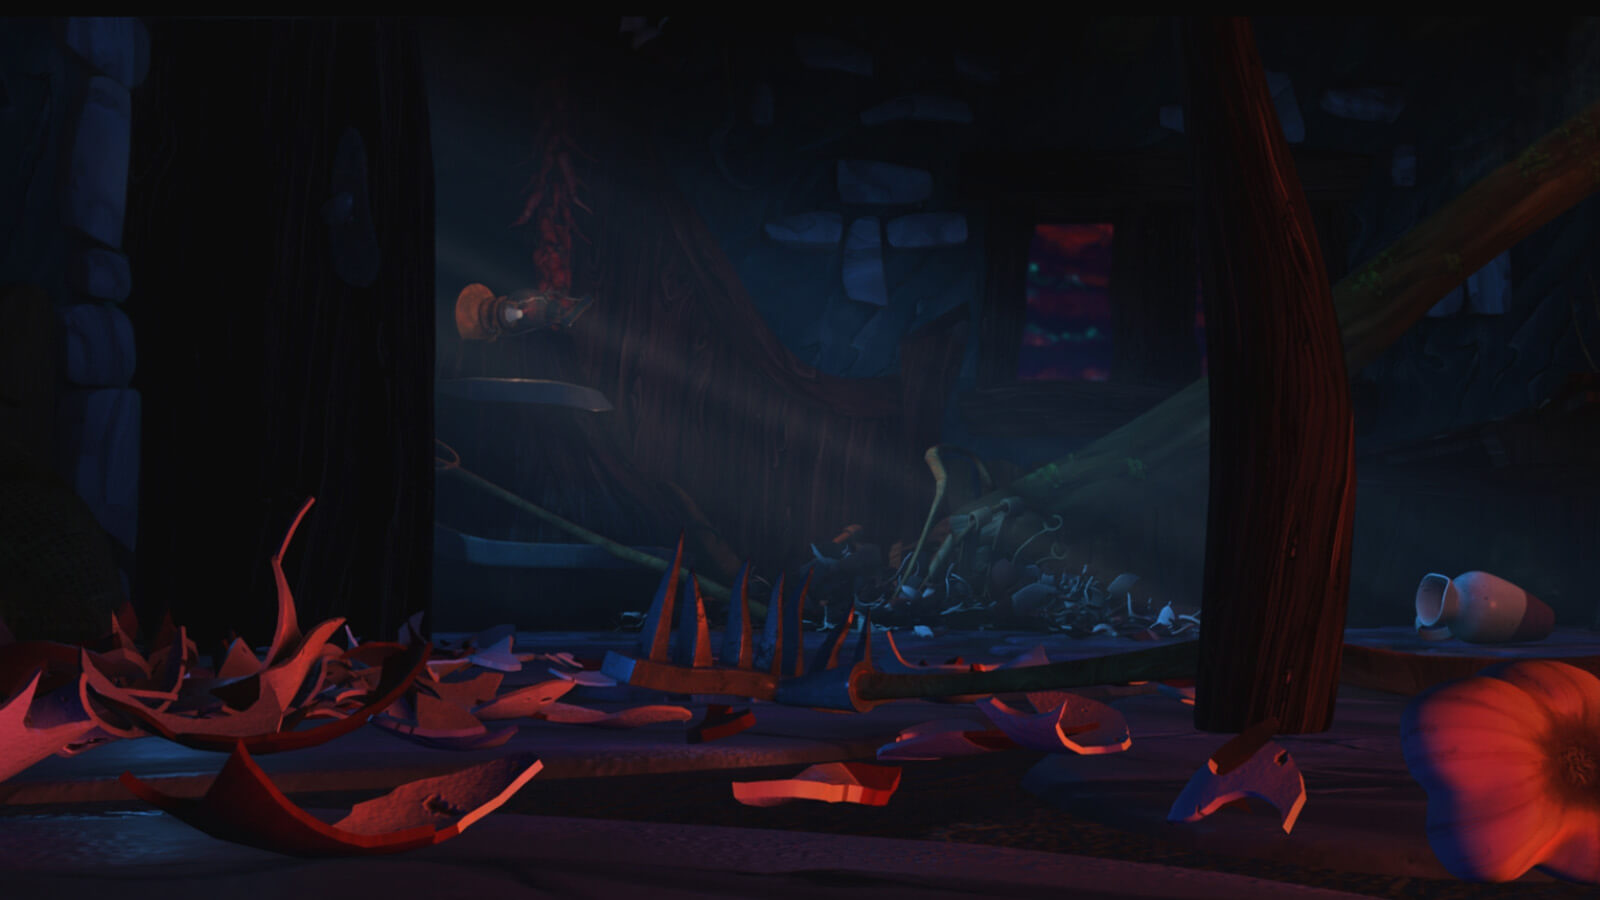 A dimly lit room filled with broken pottery shards and other fallen debris.